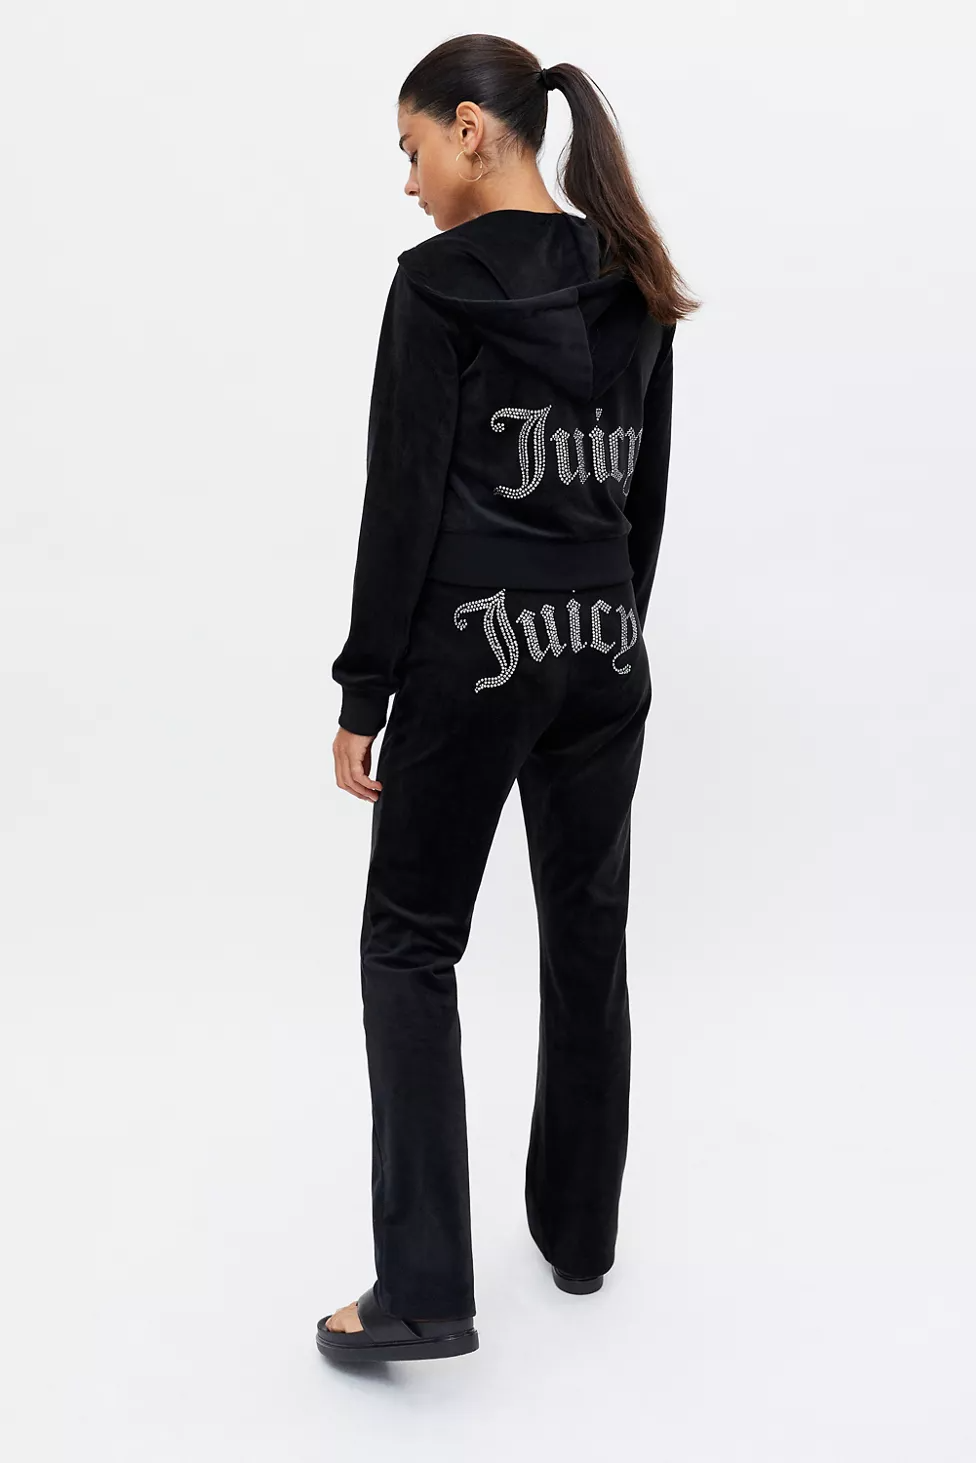 Juicy Couture + Juicy Couture Velour Track Pant